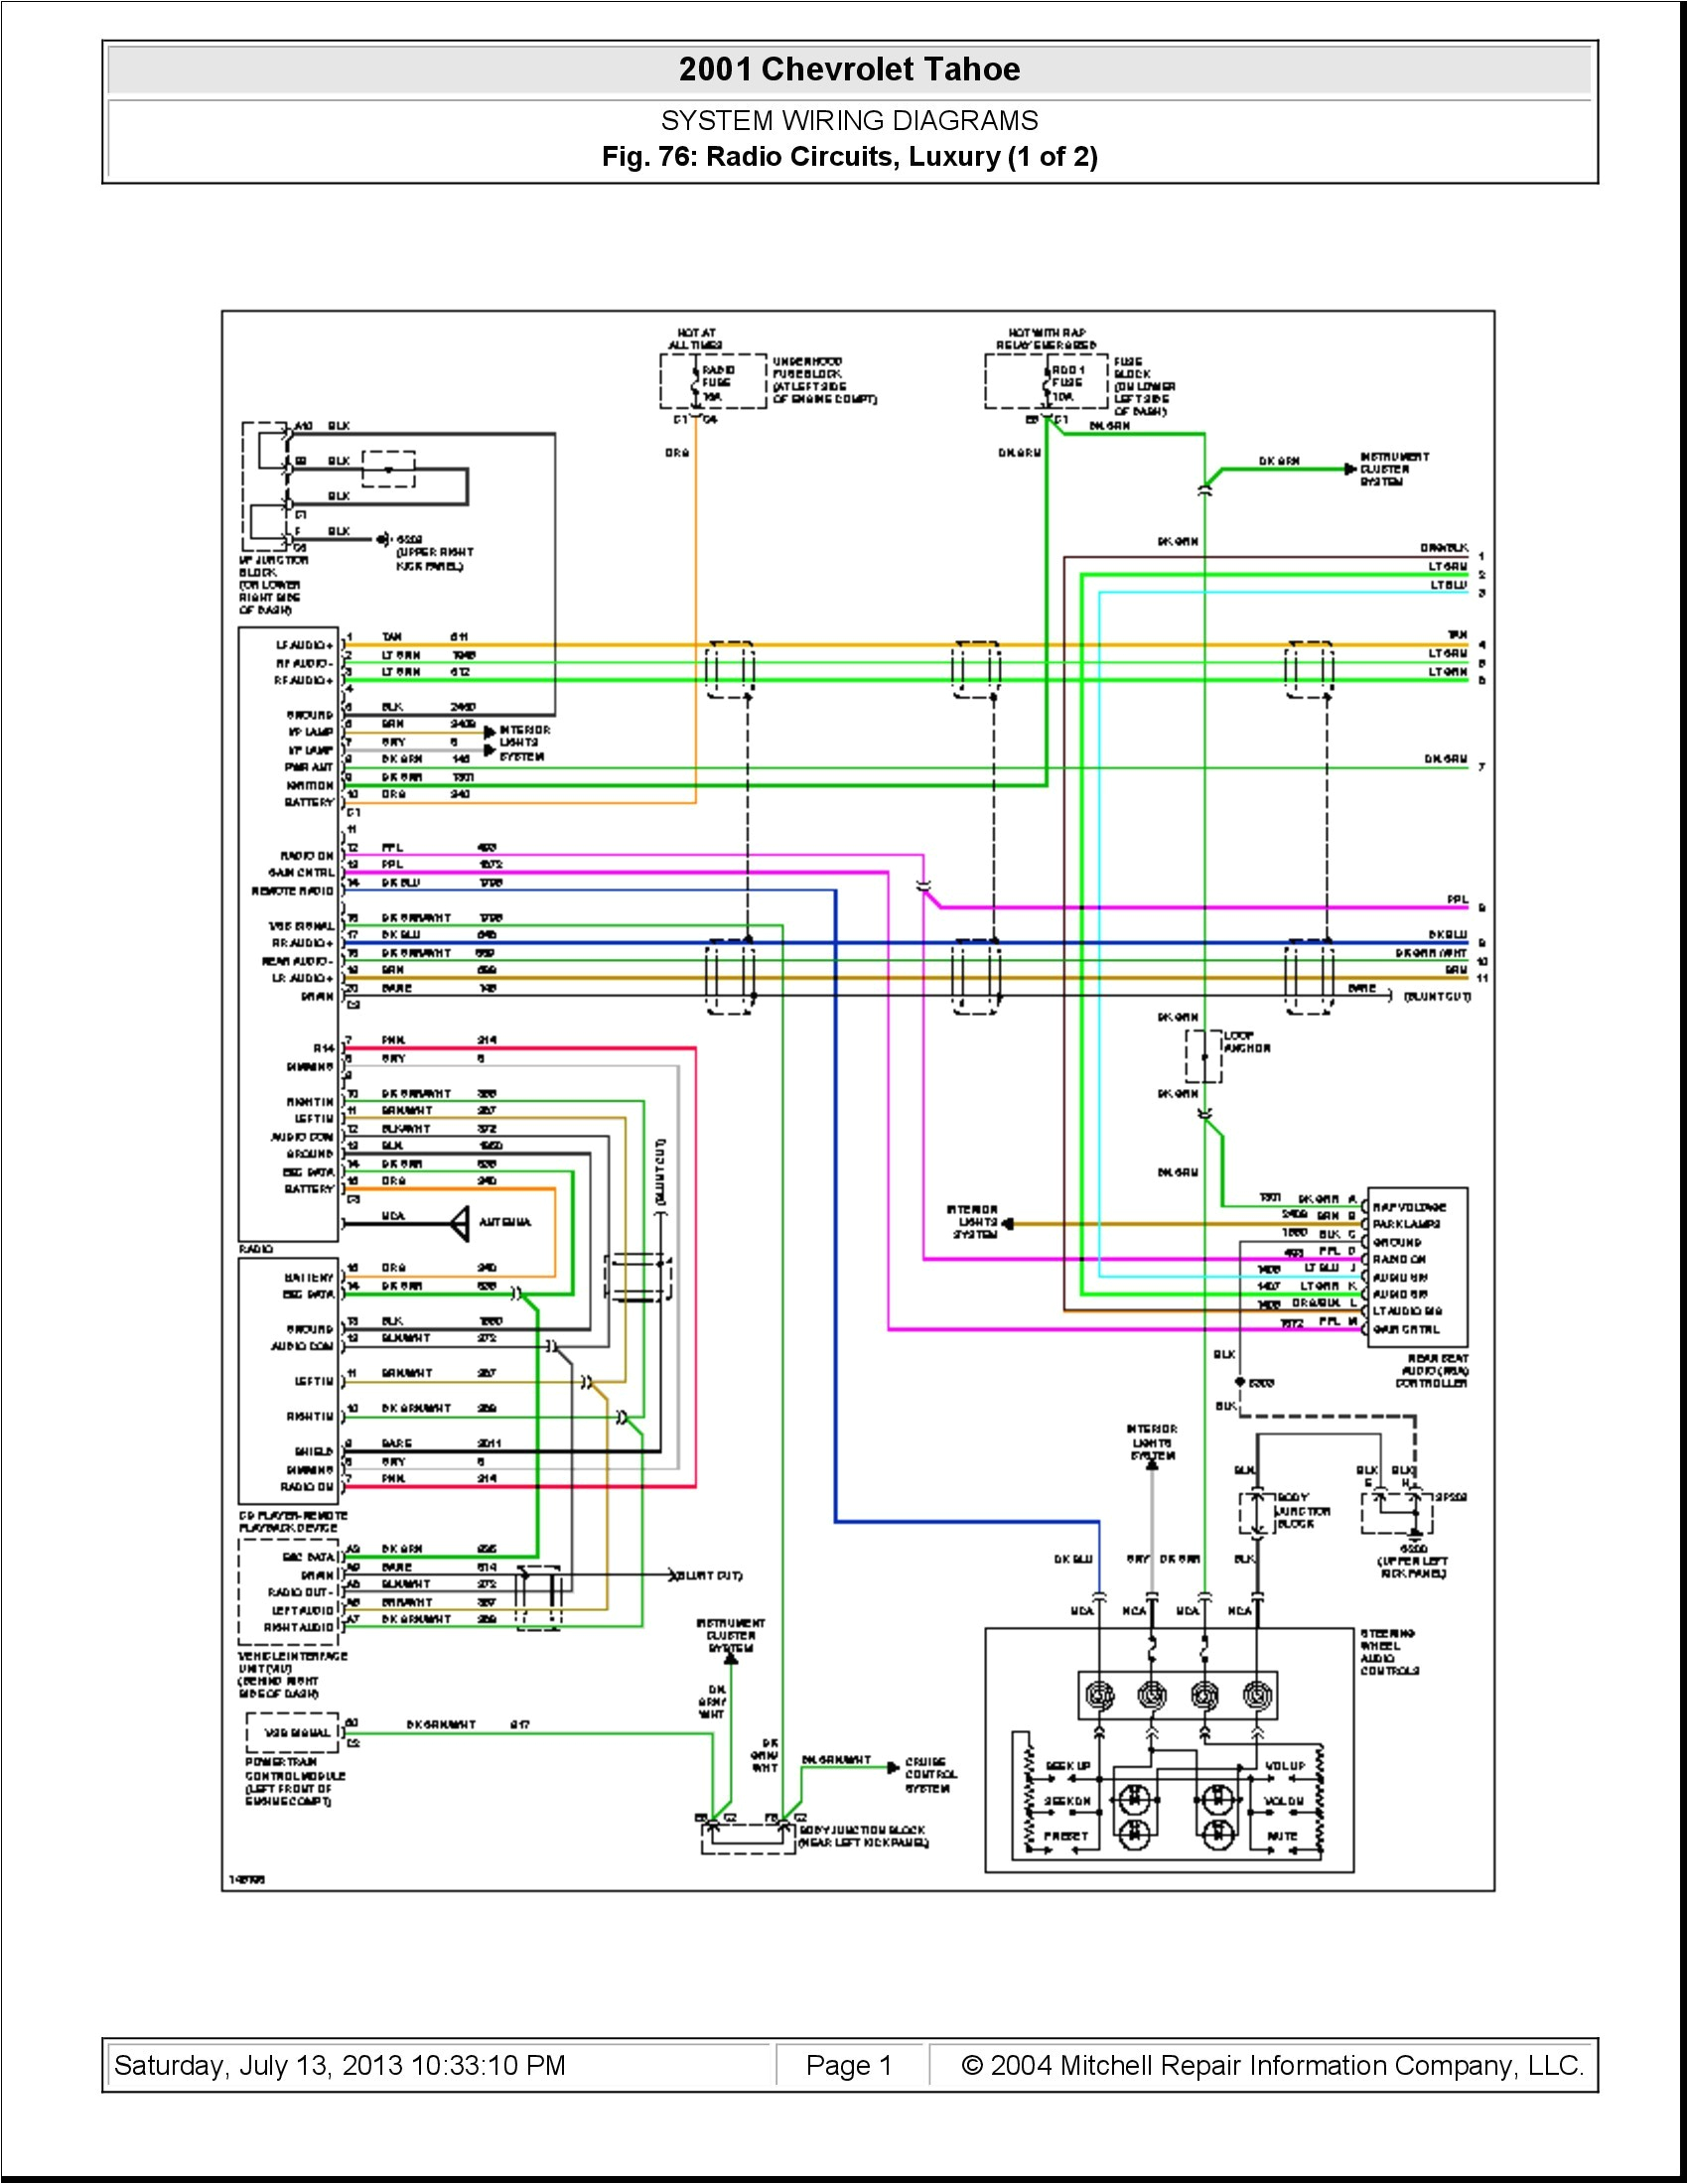 1994 chevy s10 wiring diagram wiring diagram blog 1995 chevy s10 4 3 ignition module further 1994 chevy s10 wiring